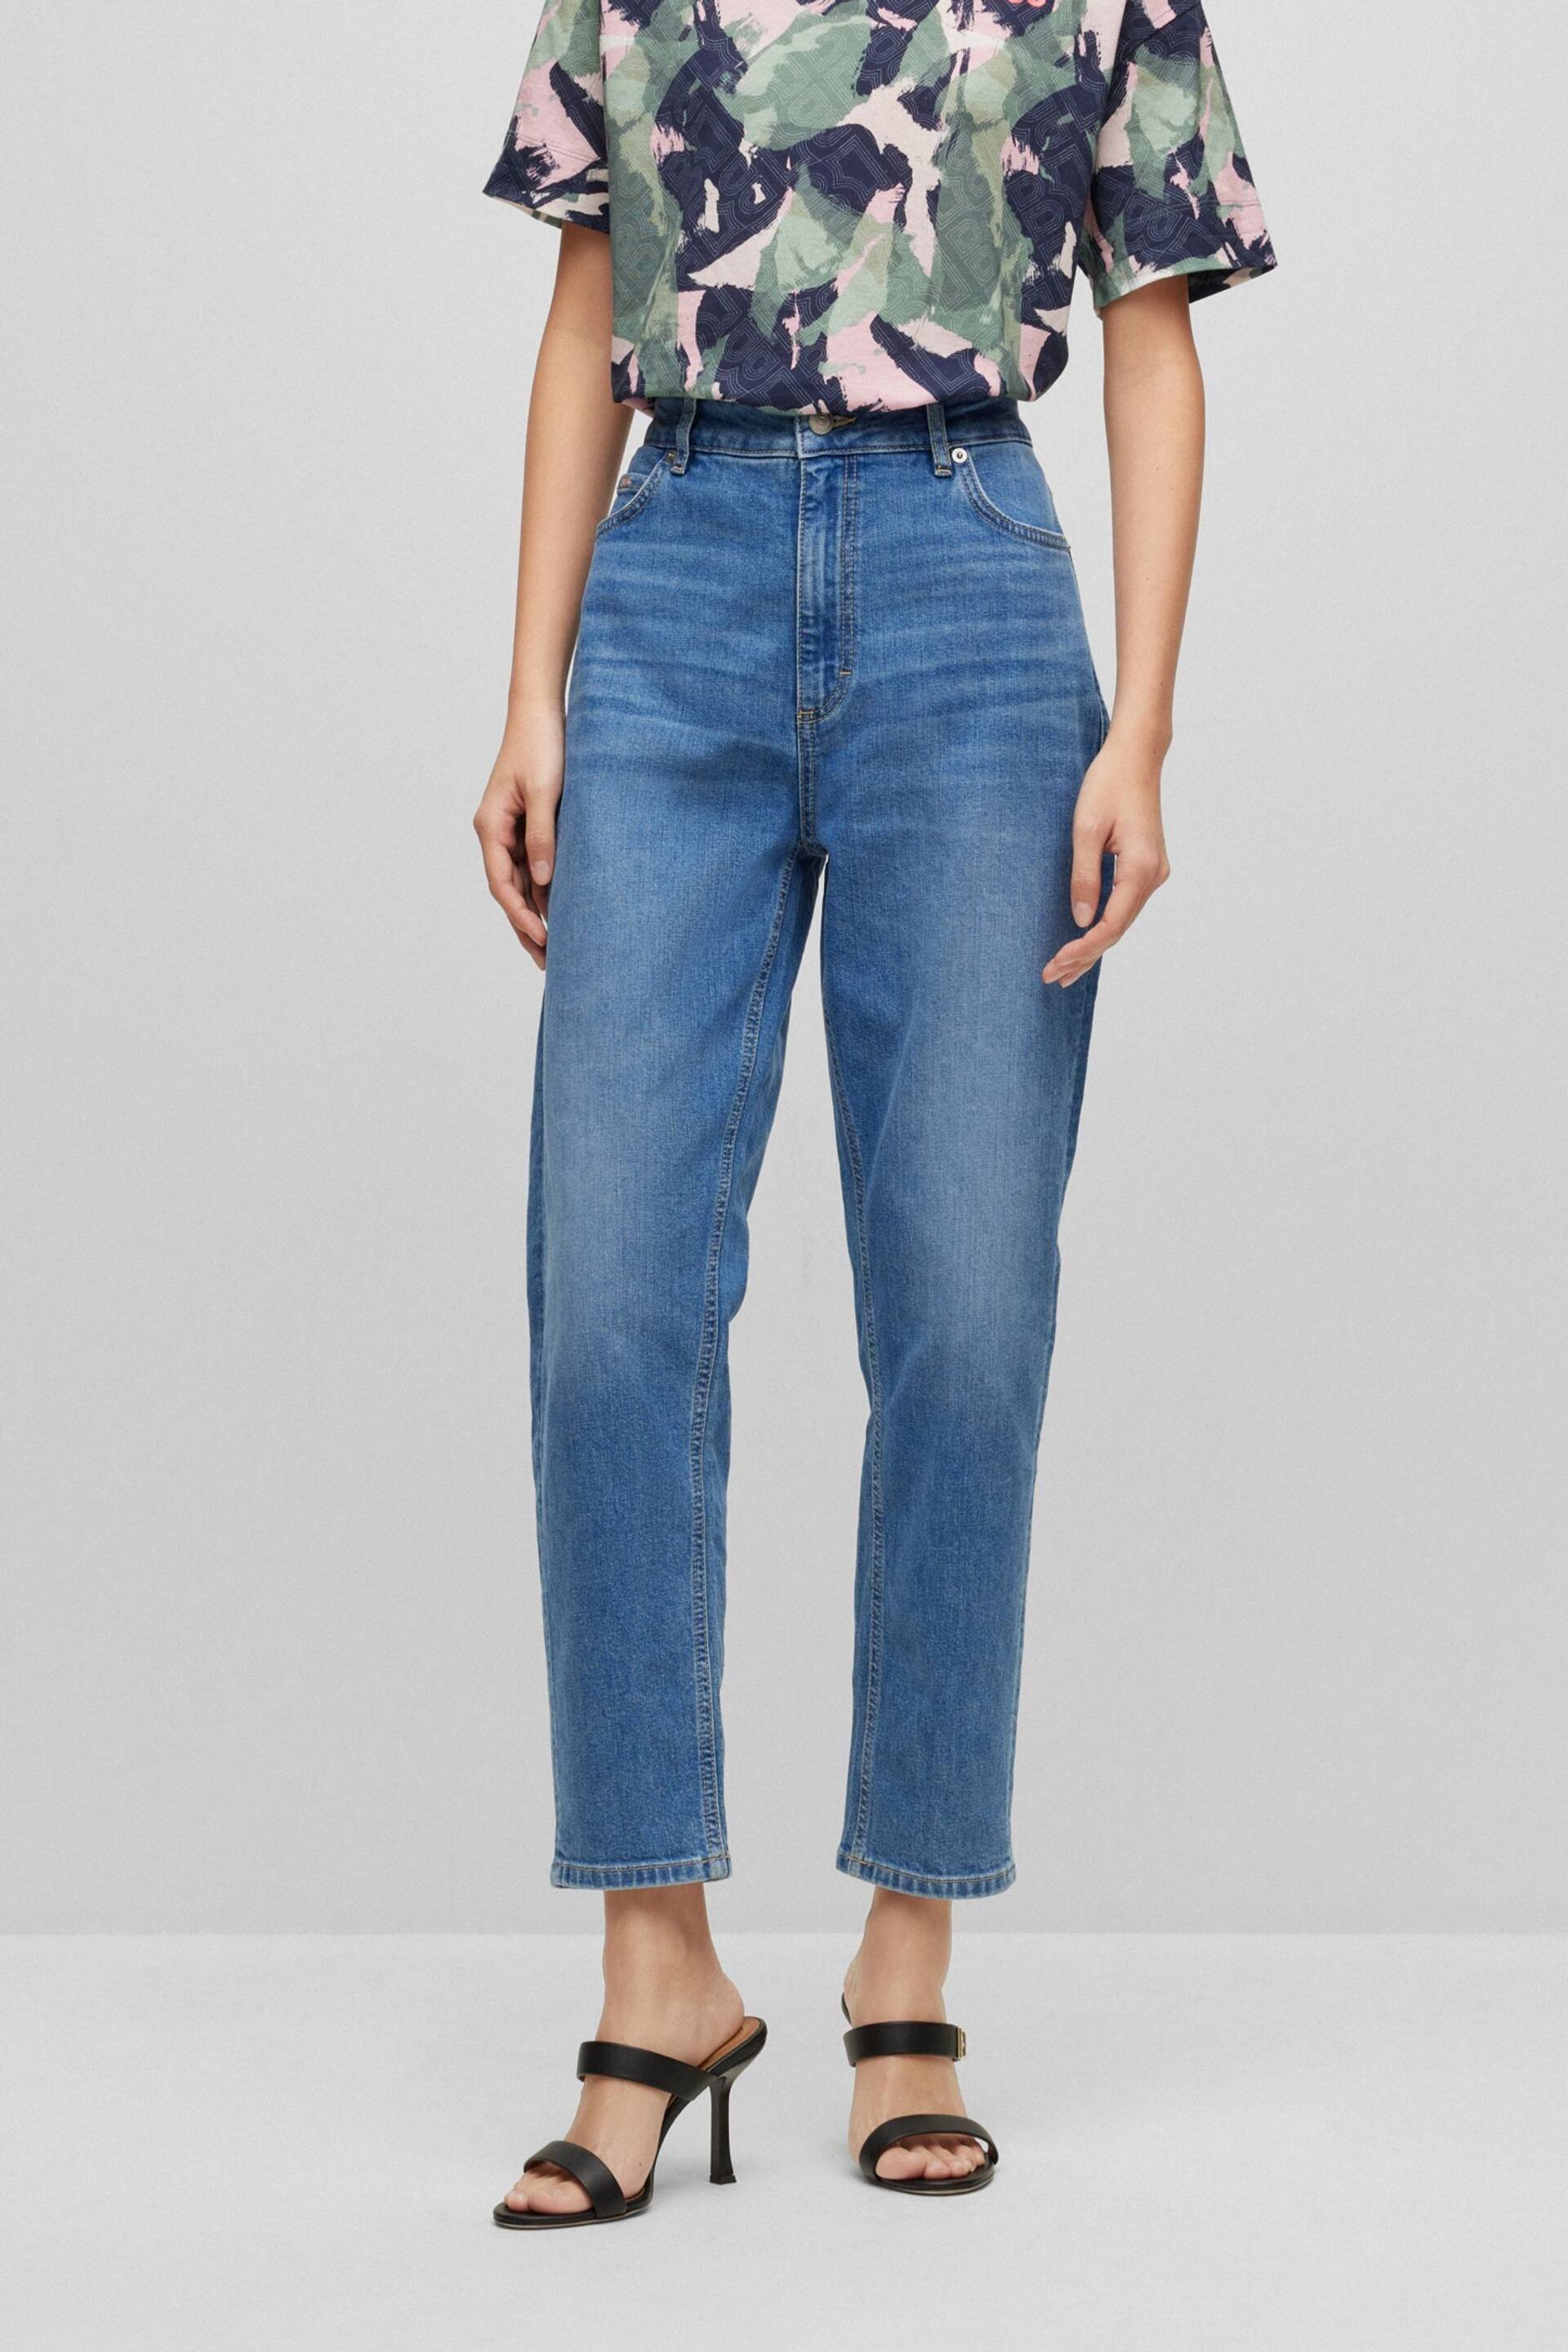 BOSS Blue Ruth Regular Fit High Waisted Stretch Jeans - Image 1 of 5